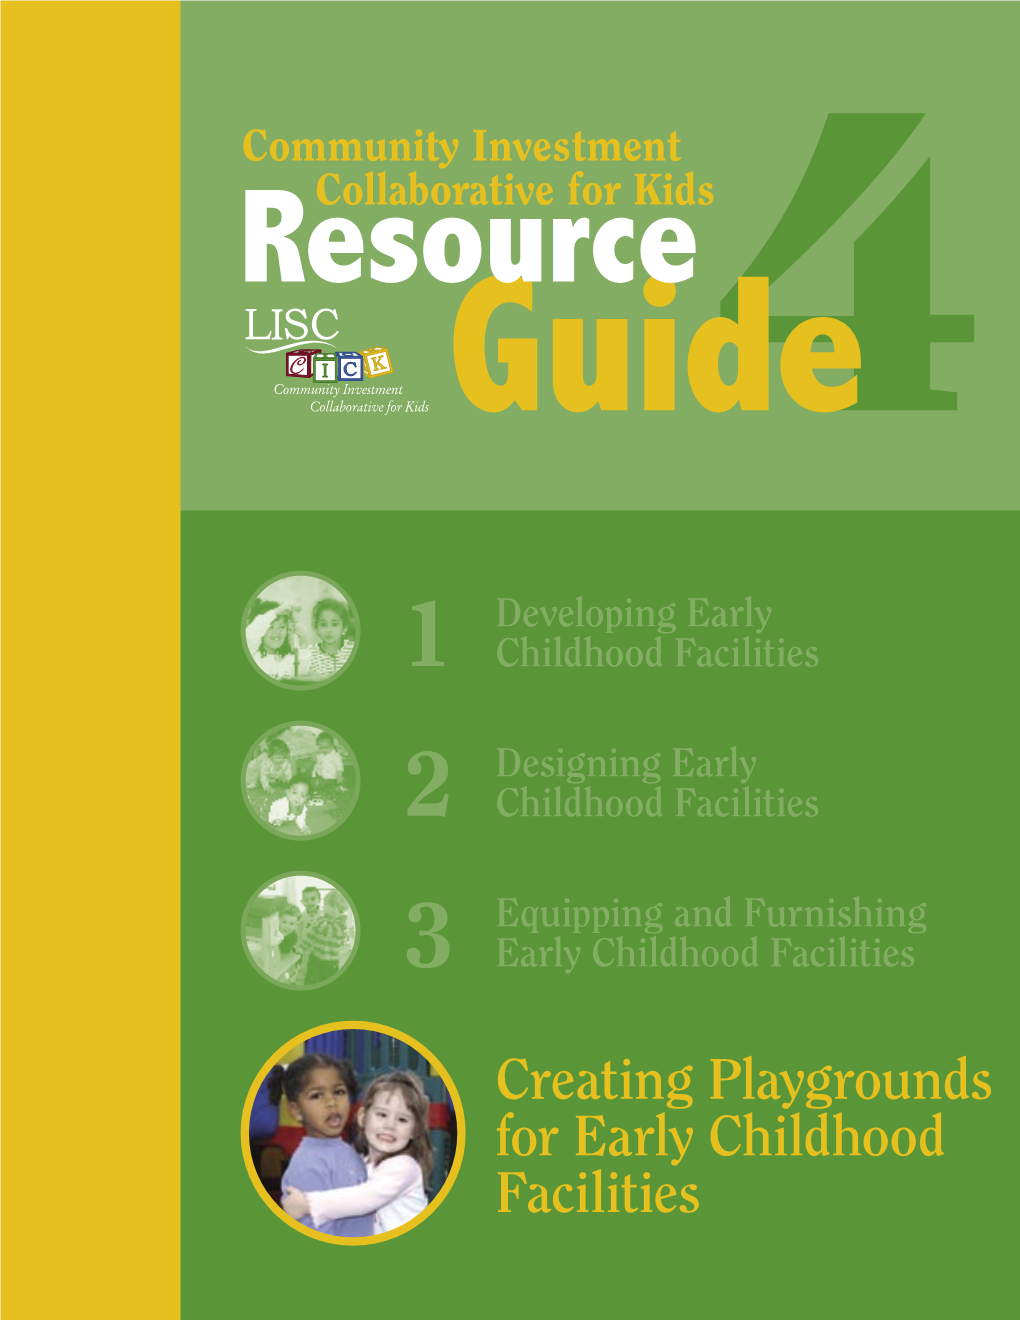 Creating Playgrounds for Early Childhood Facilities